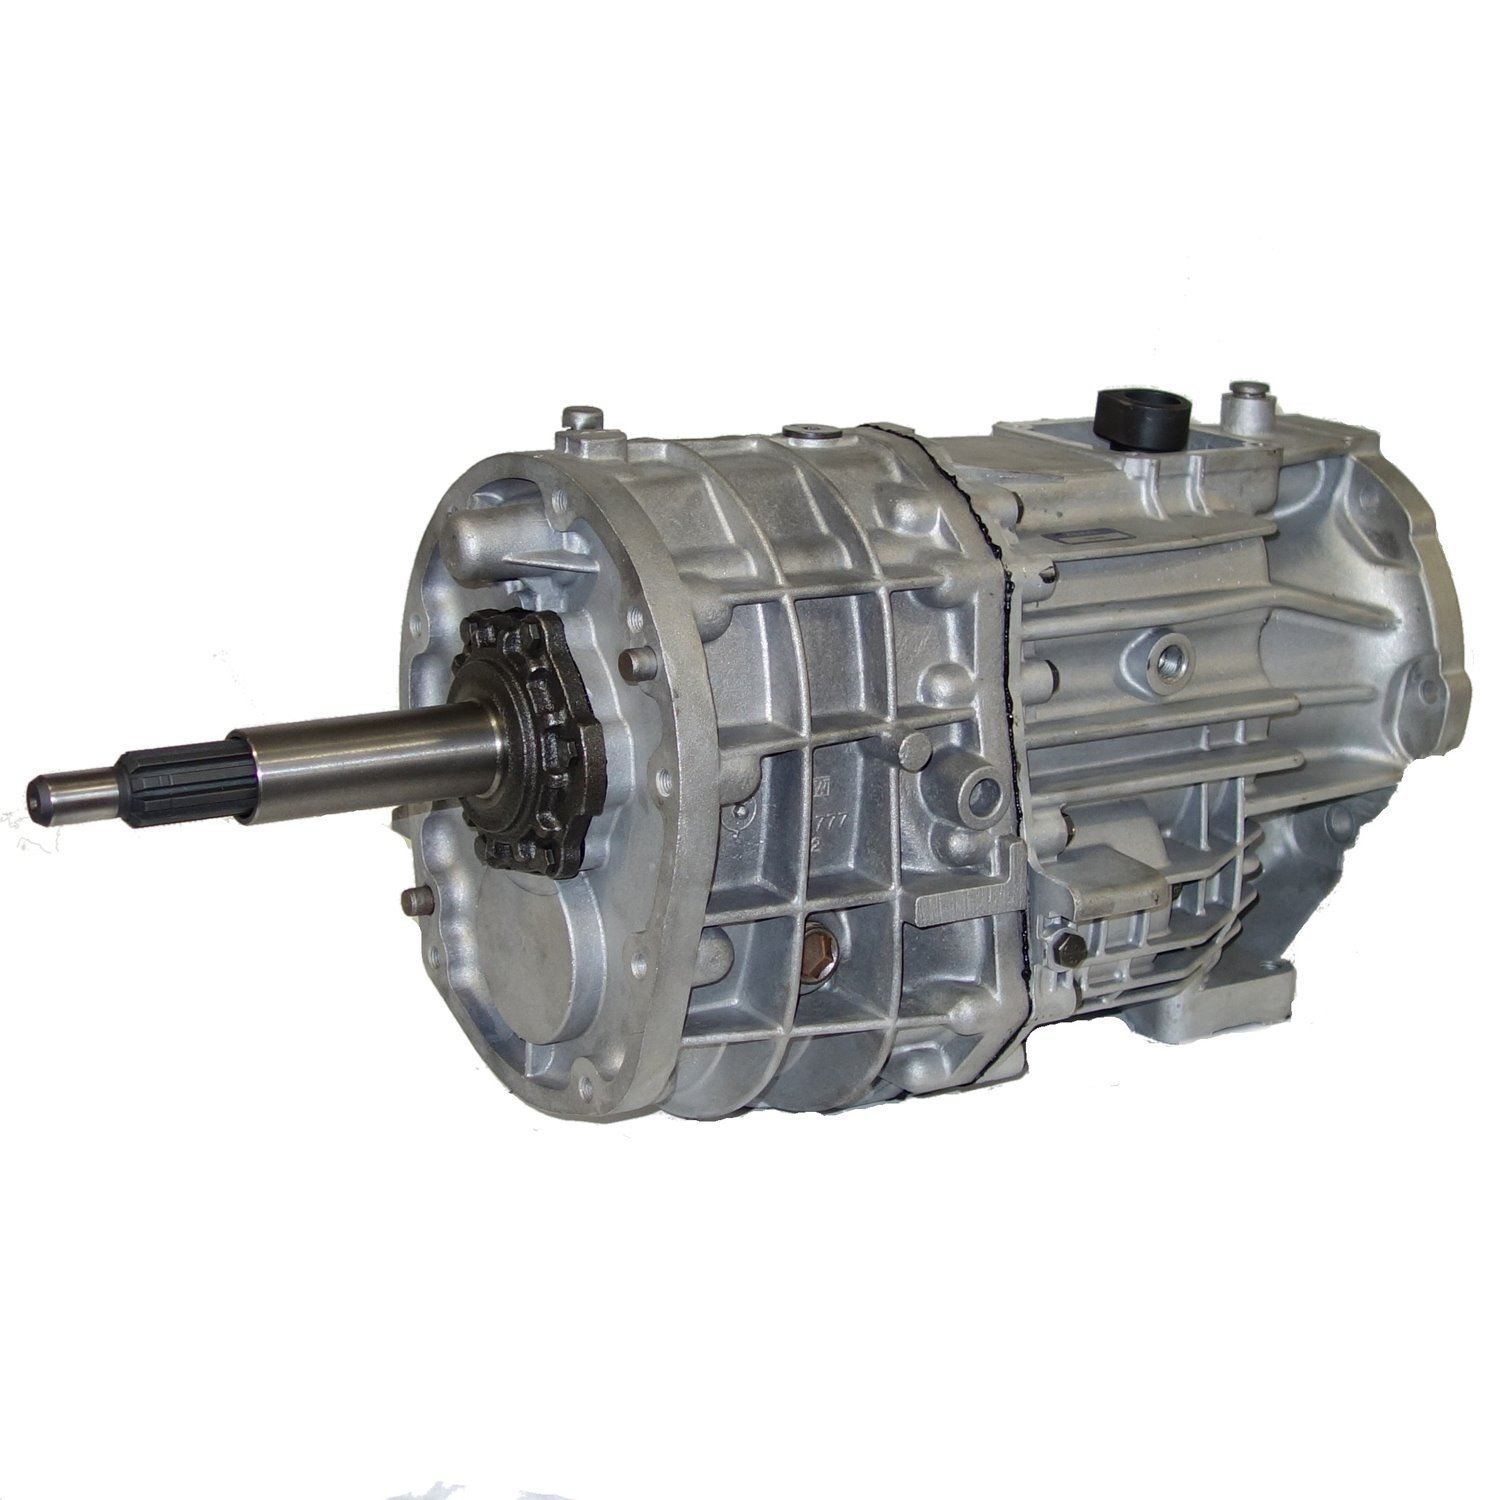 Remanufactured NV3550 Manual Transmission for Jeep 00-01 Cherokee, 4x4, 5 Speed